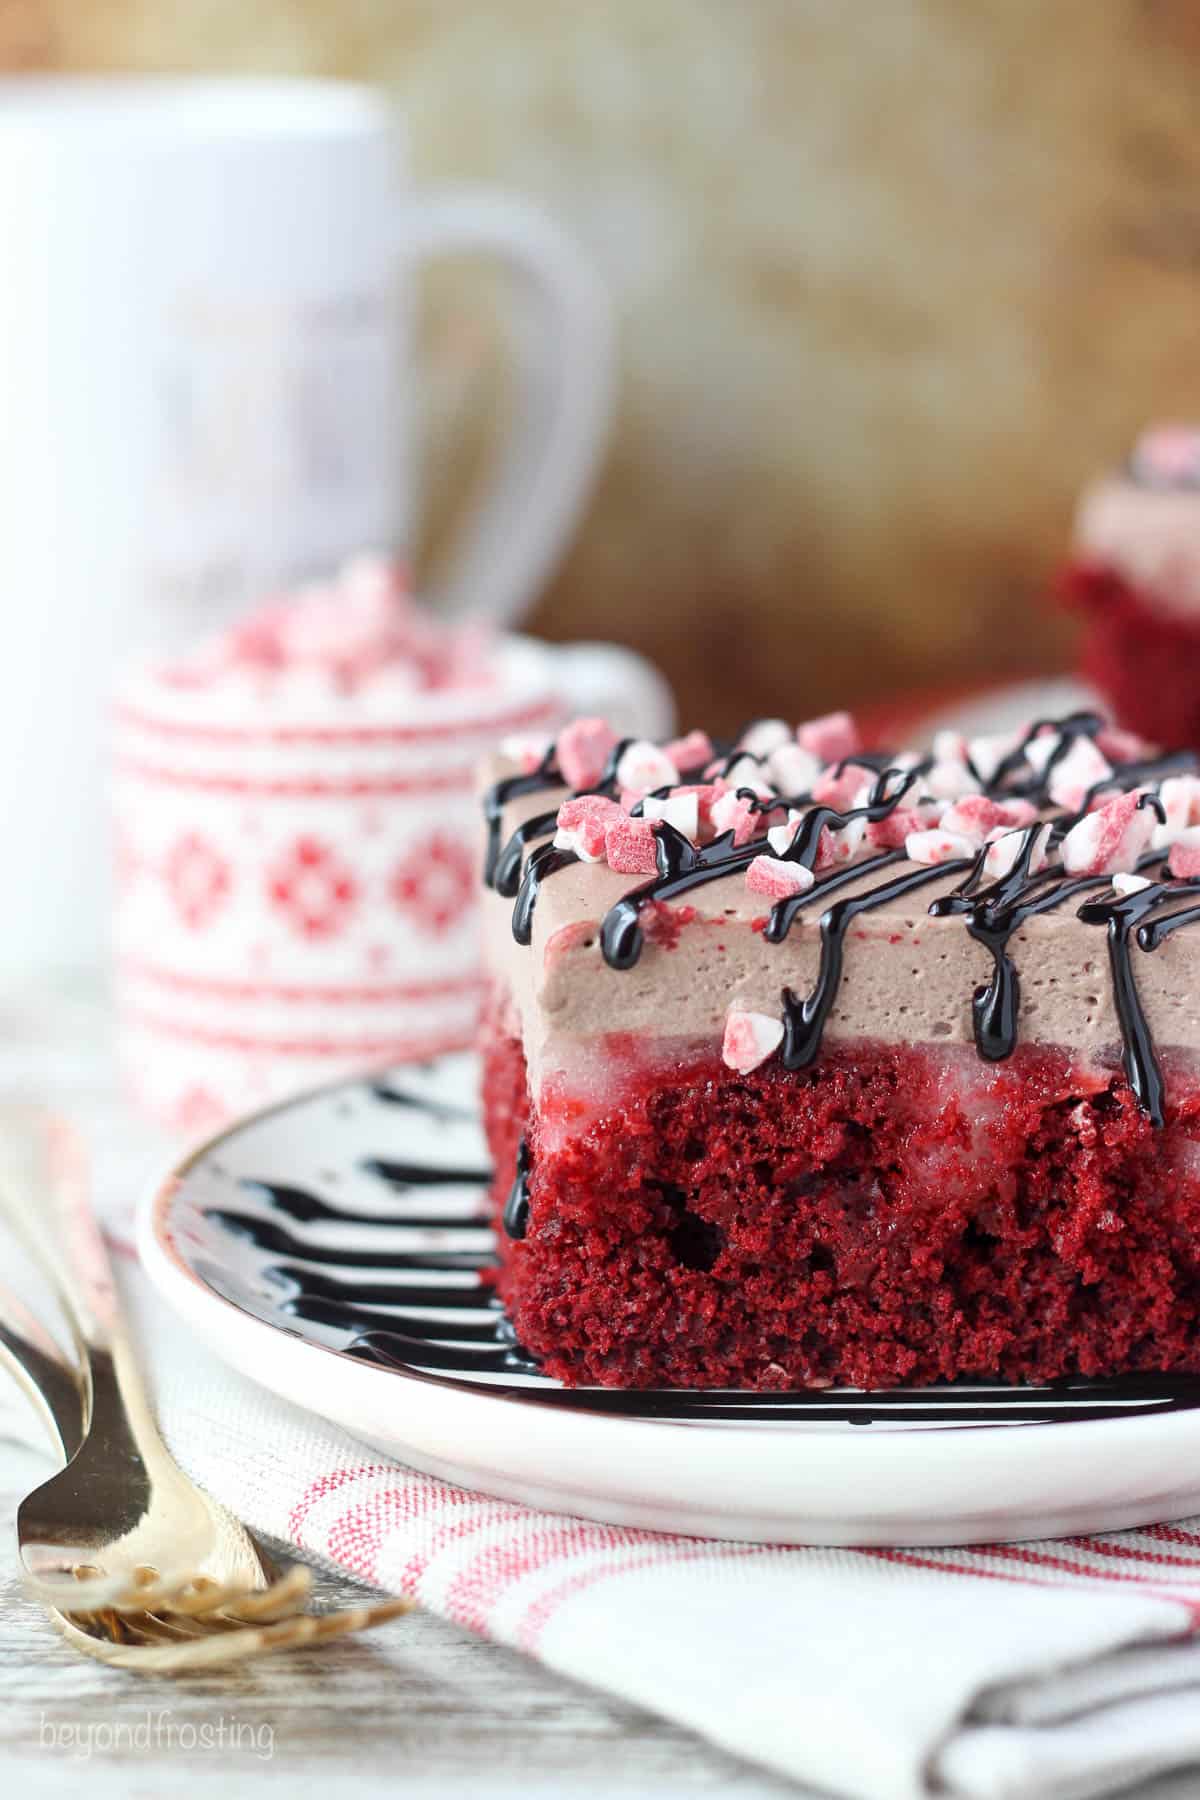 I am loving this Peppermint Hot Chocolate Poke Cake. A peppermint red velvet cake soaked in a white chocolate peppermint pudding and topped with hot chocolate whipped cream.